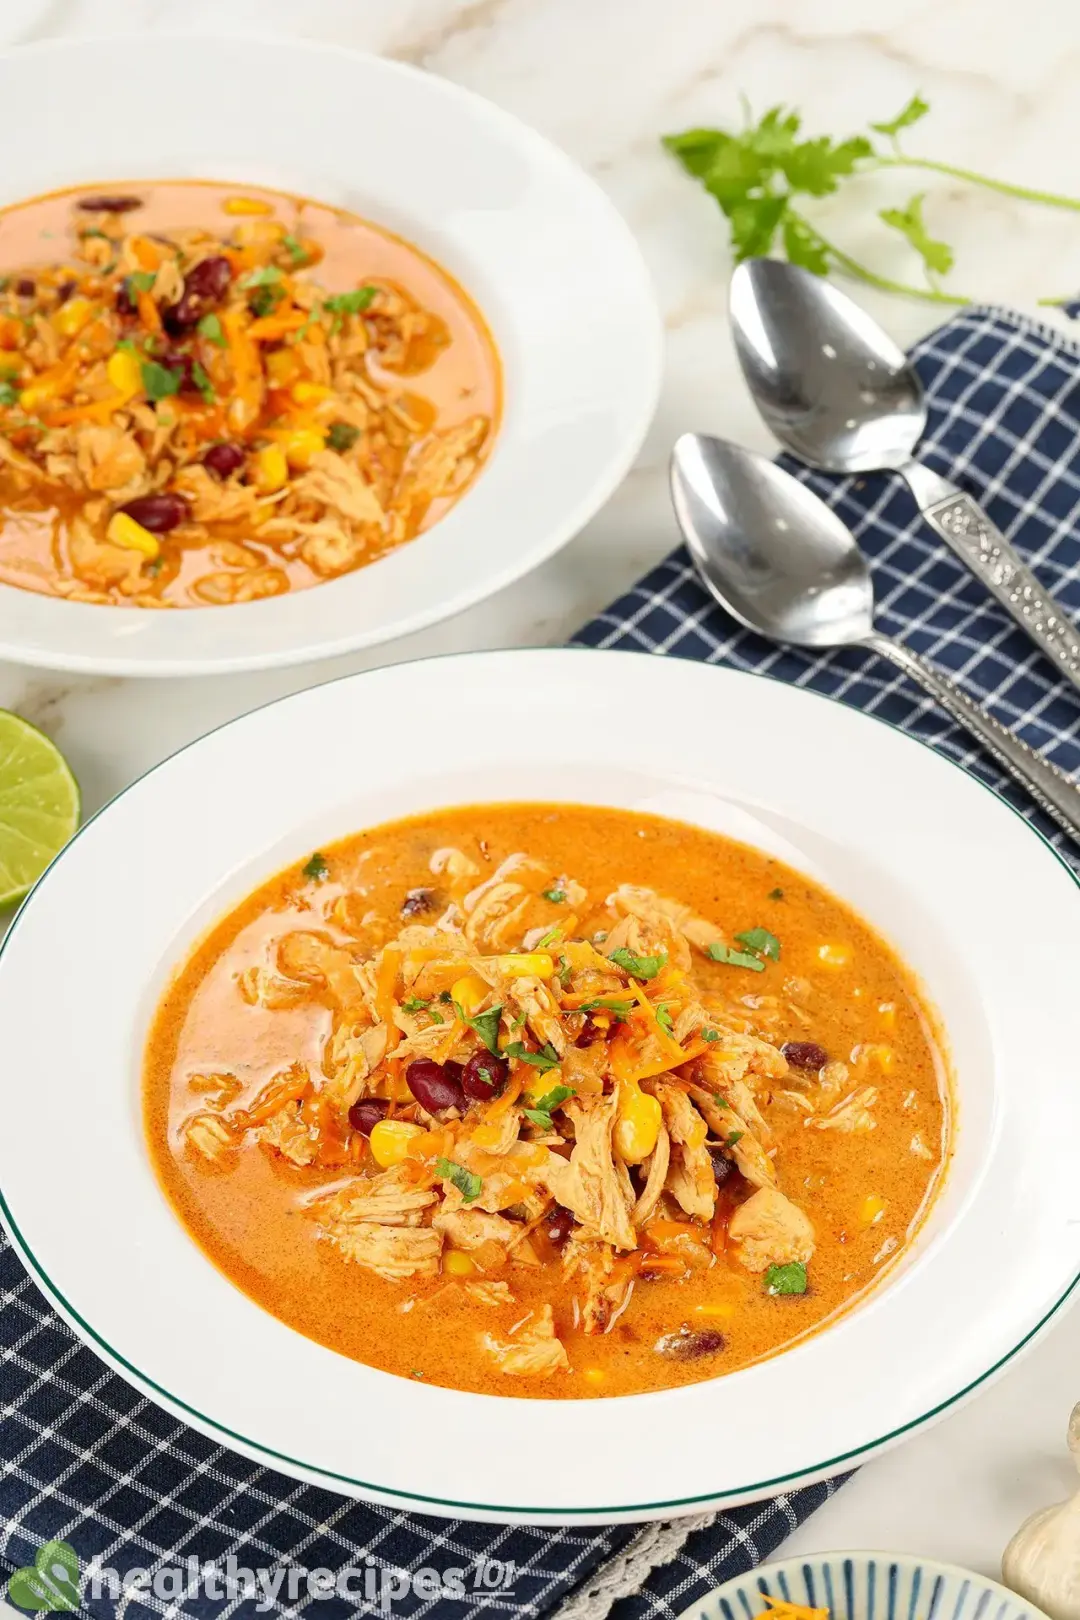 store and Reheat Chicken Enchilada Soup